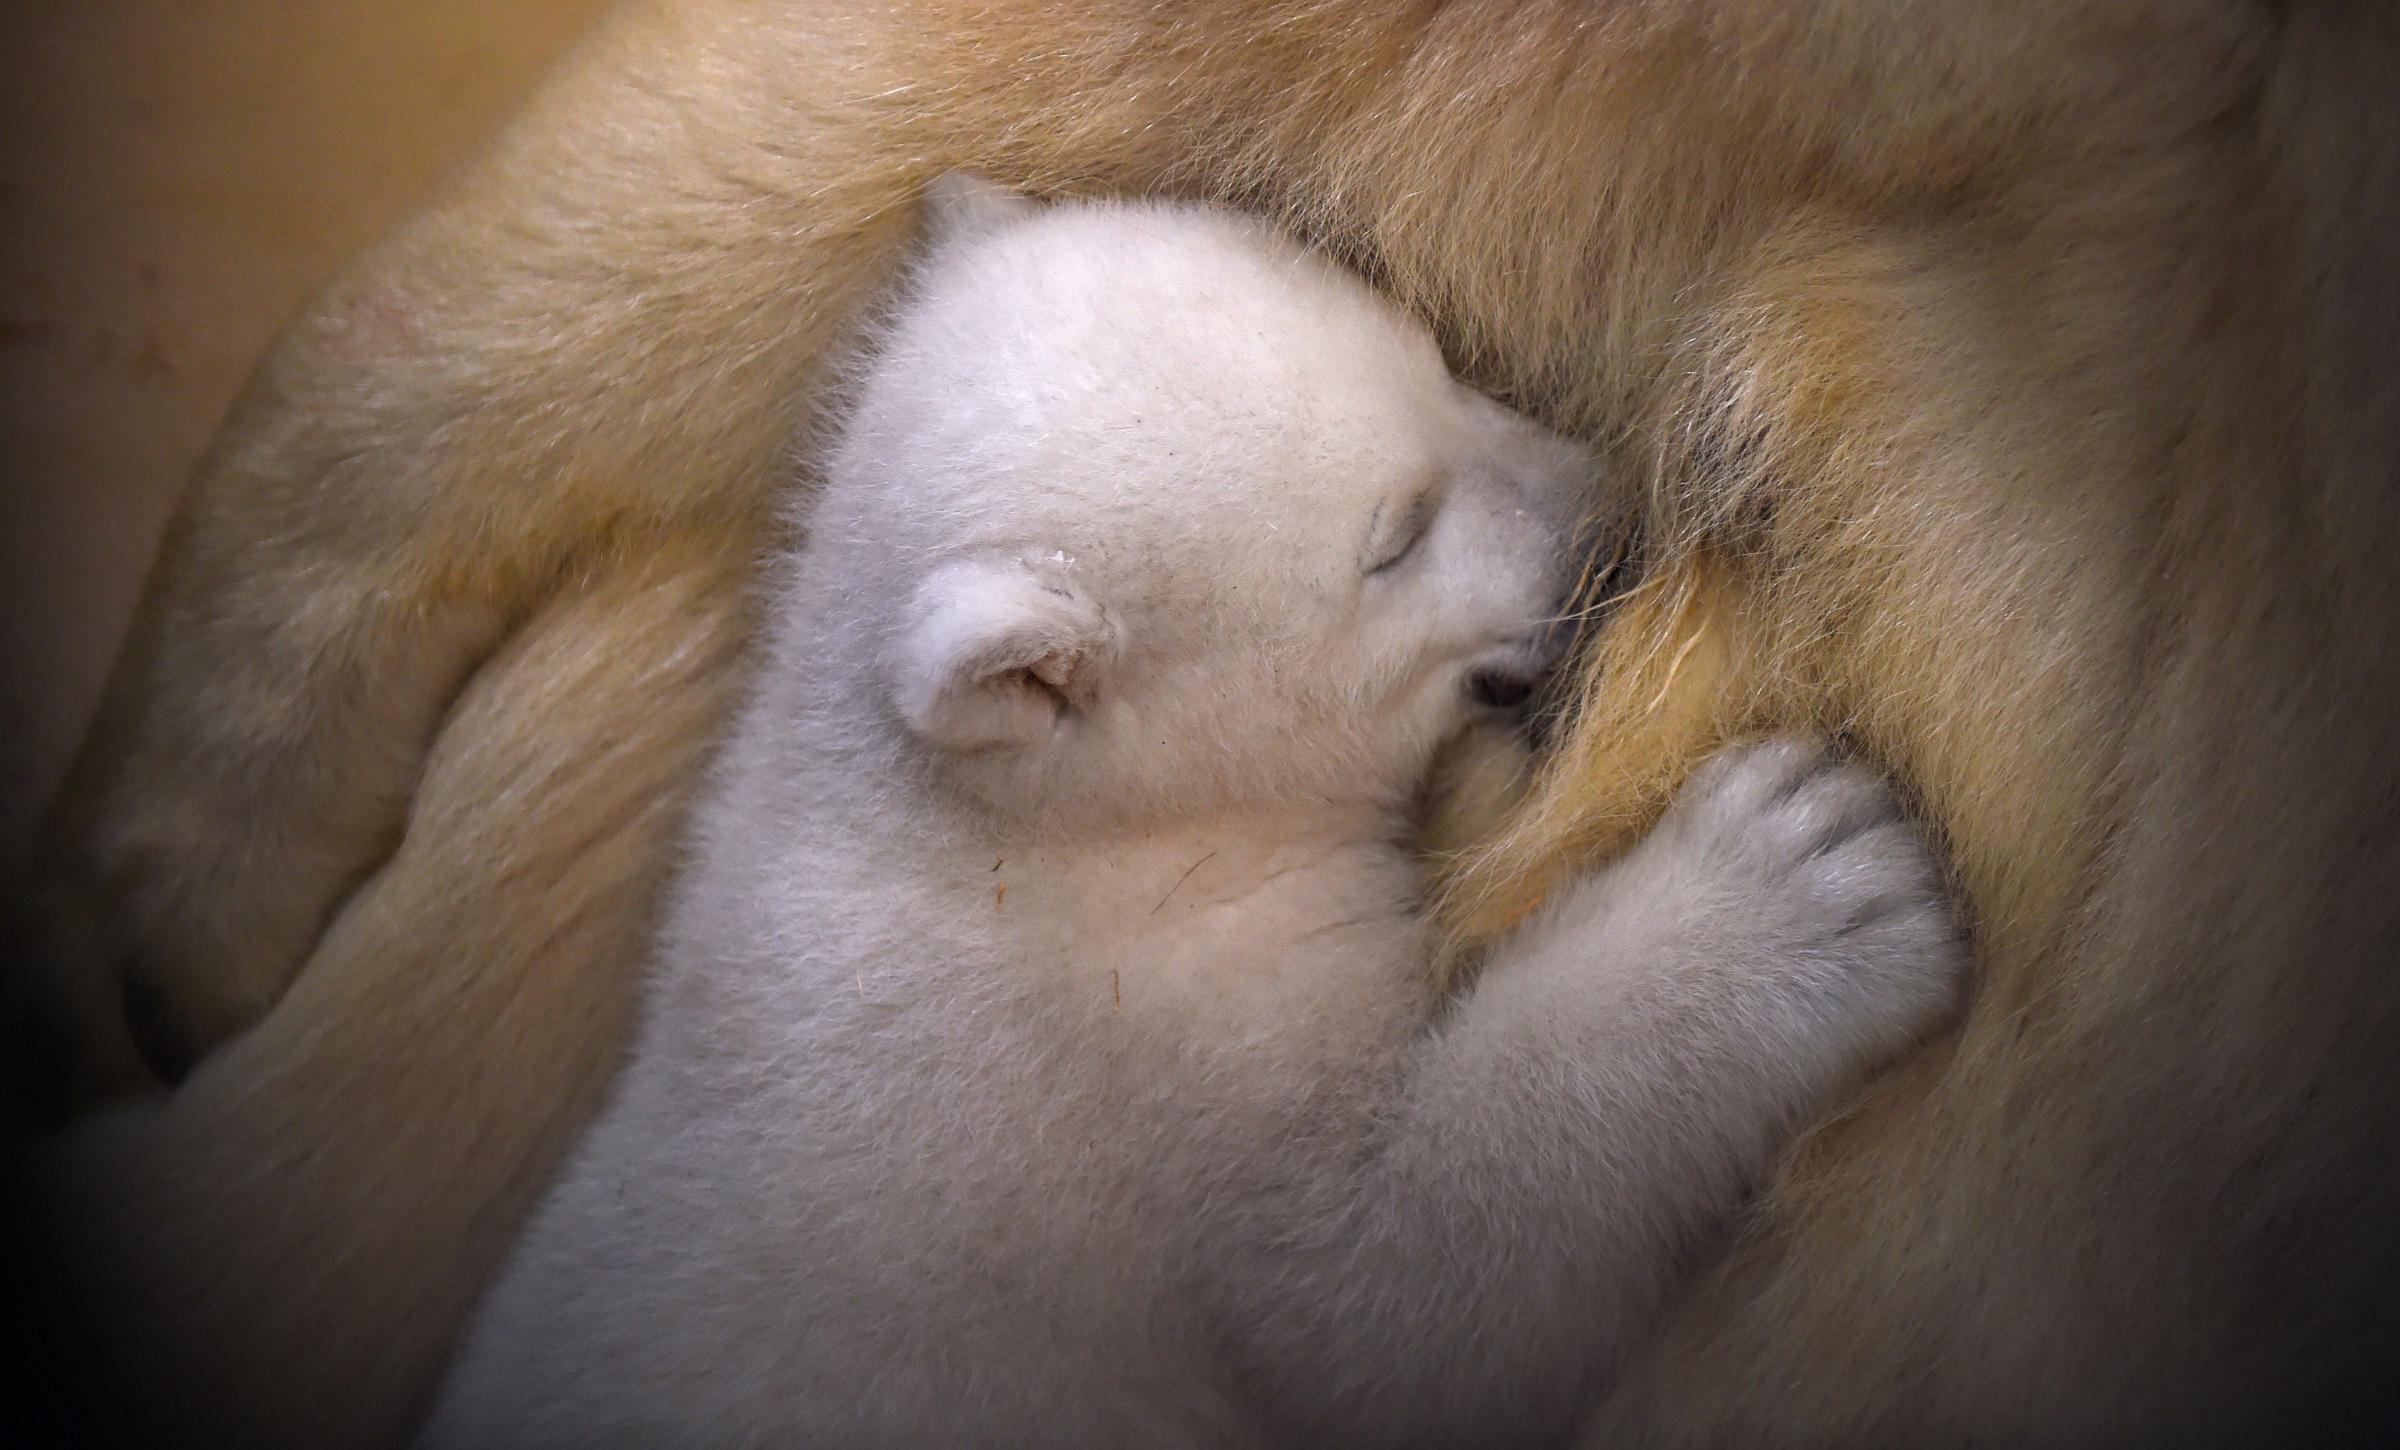 A female baby polar bear is fed by her mother in Bremerhaven, Germany, on March 9, 2016.